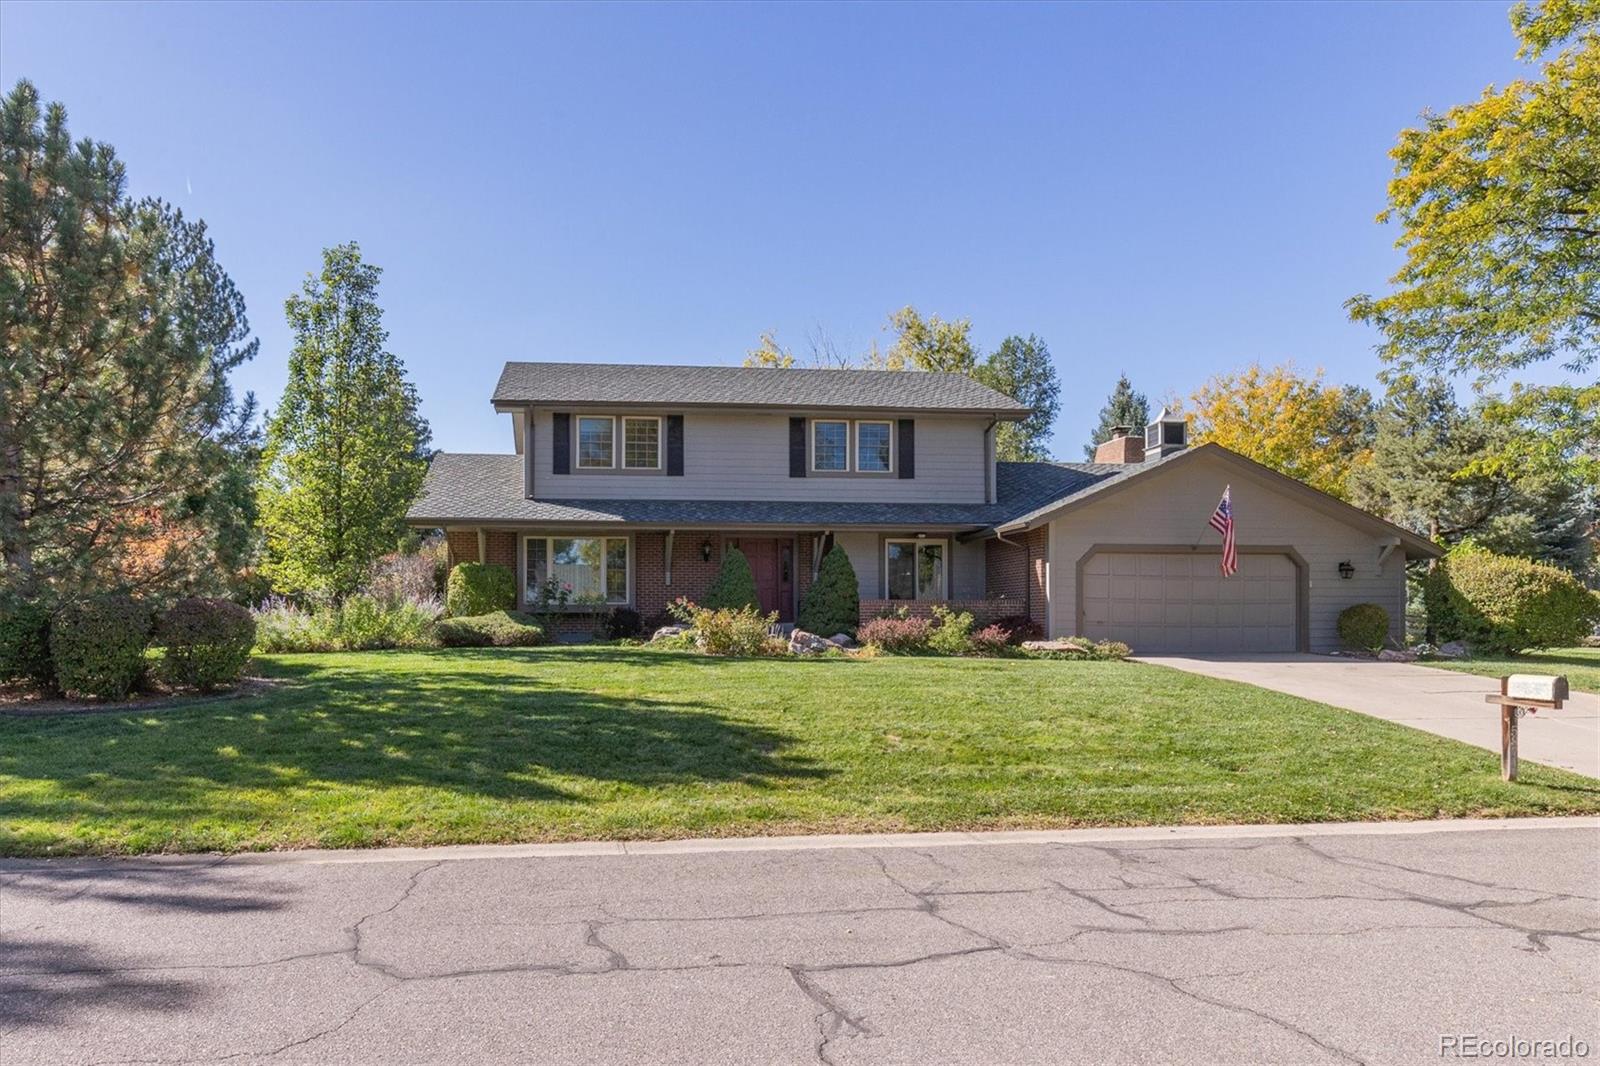 5871 s laurel place, littleton sold home. Closed on 2023-12-22 for $975,000.